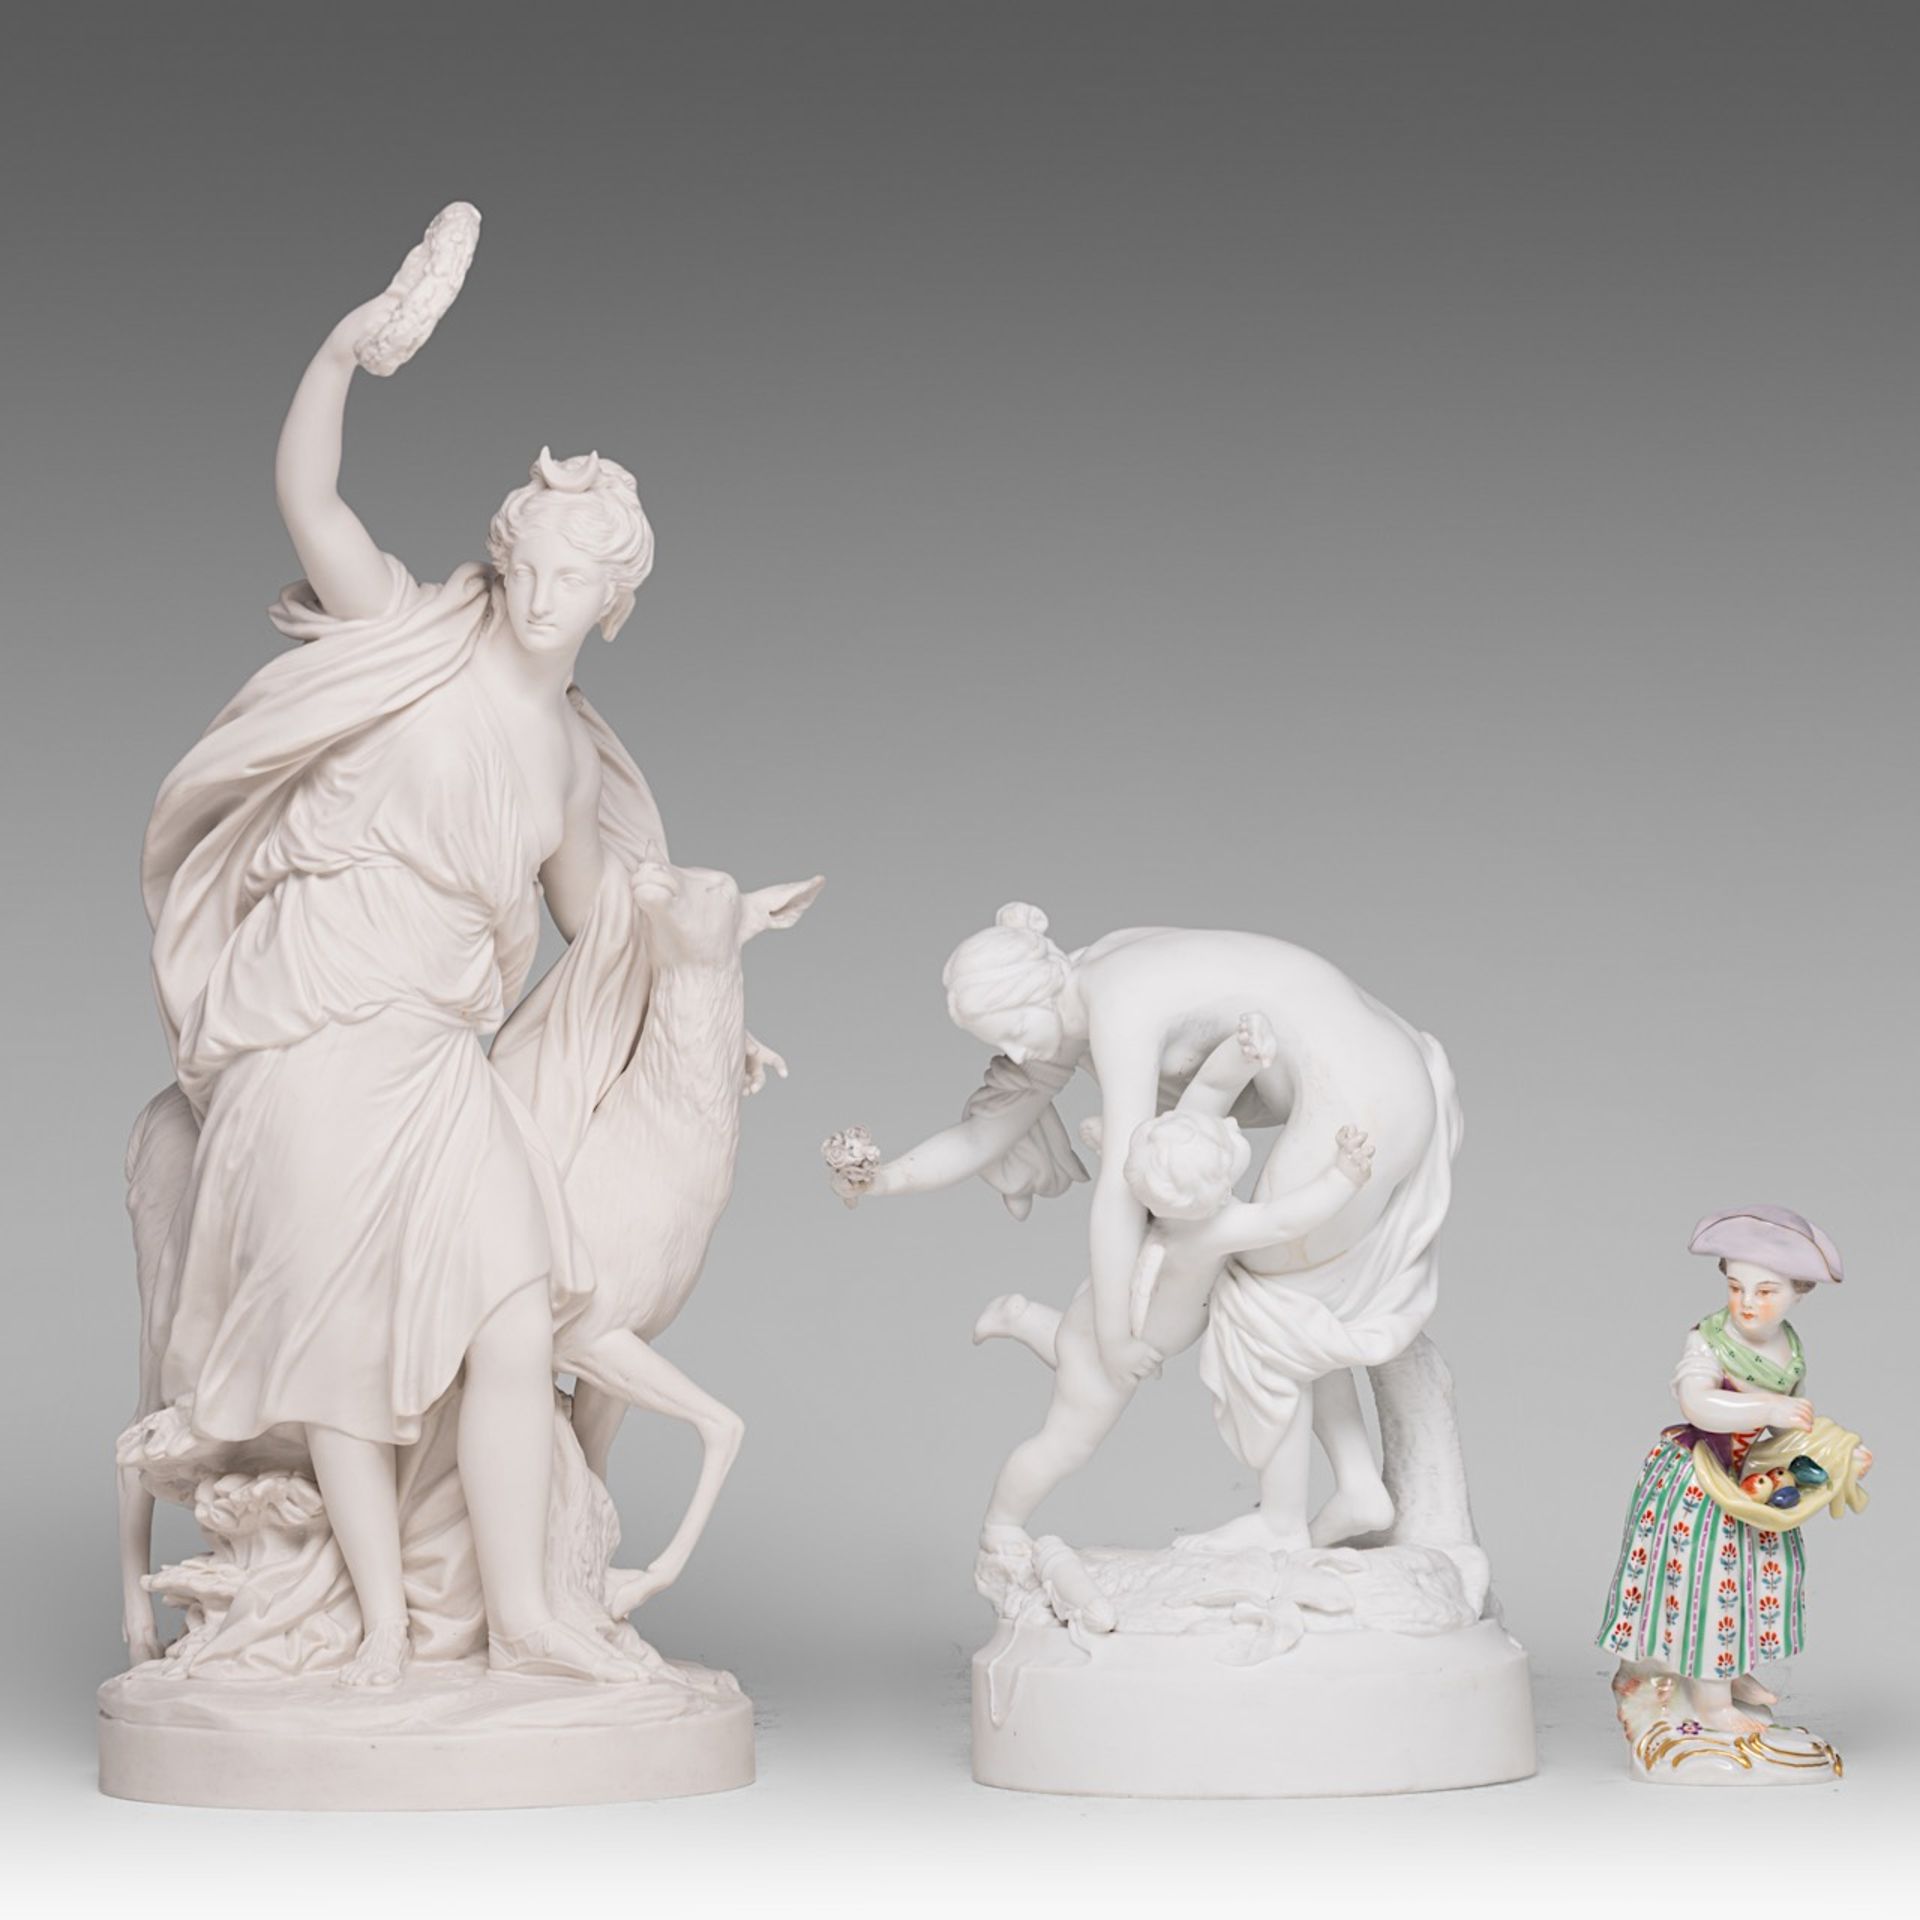 A collection of two biscuit groups and a Meissen polychrome porcelain figurine, H 13,5 - 37,5 cm